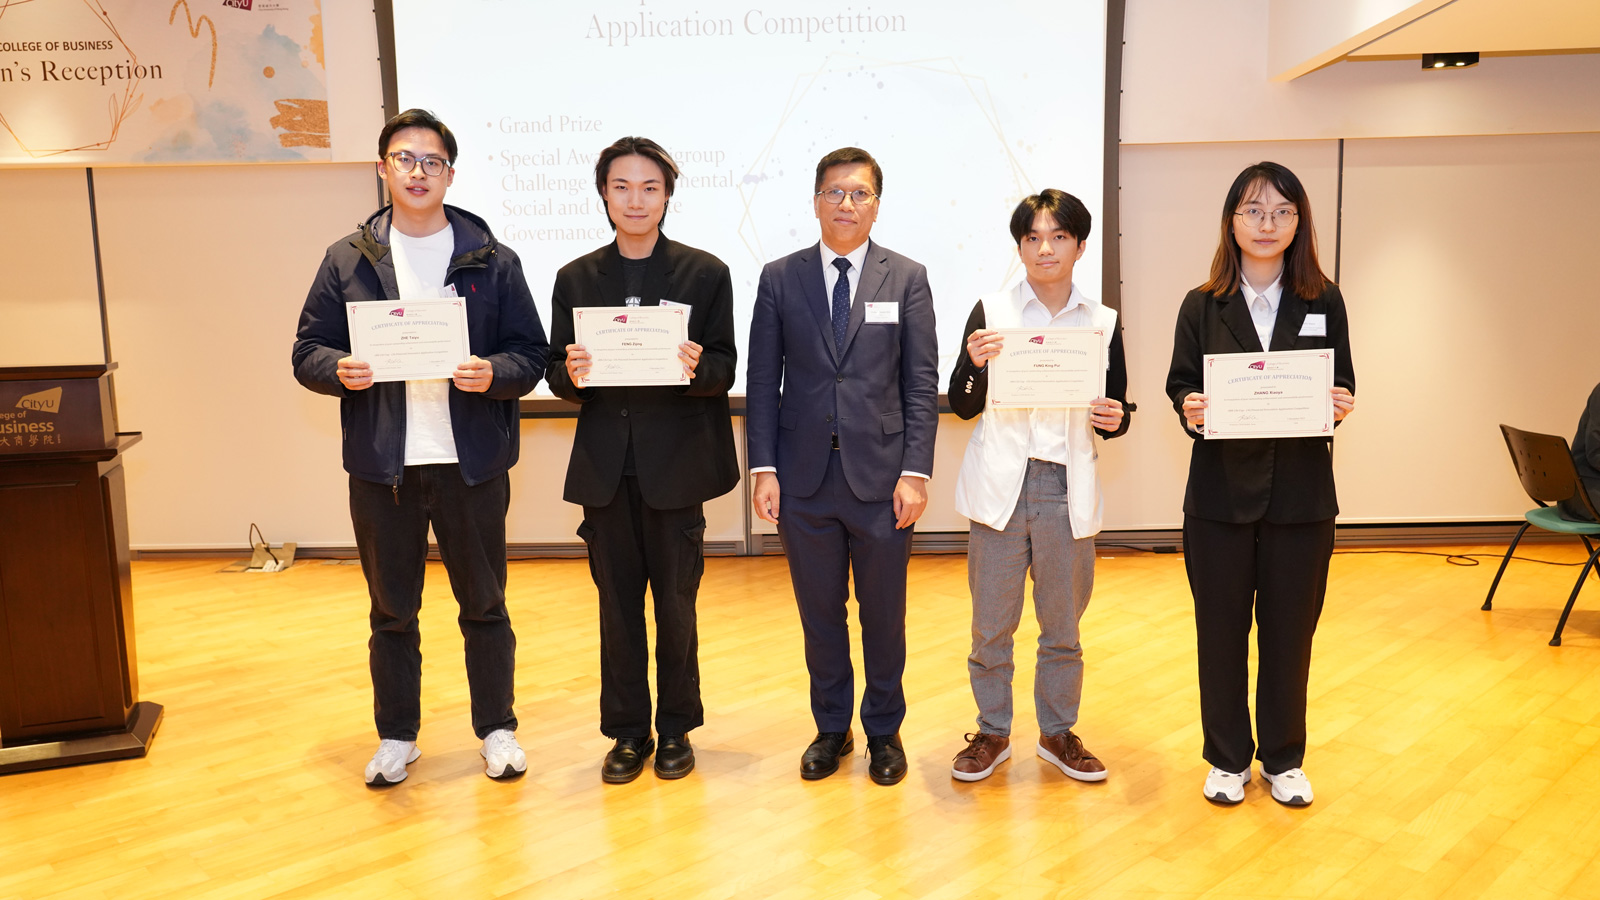 Dean Kalok Chan (middle) presents certificates of appreciation to (from left) Zhe Taiyu (BBA GBSM), Feng Zijing (BSc CFFT), Fung King-pui (BSc CFFT), Zhang Xiaoya (BSc CFFT) for winning the 18th Citi Cup - Citi Financial Innovation Application Competition